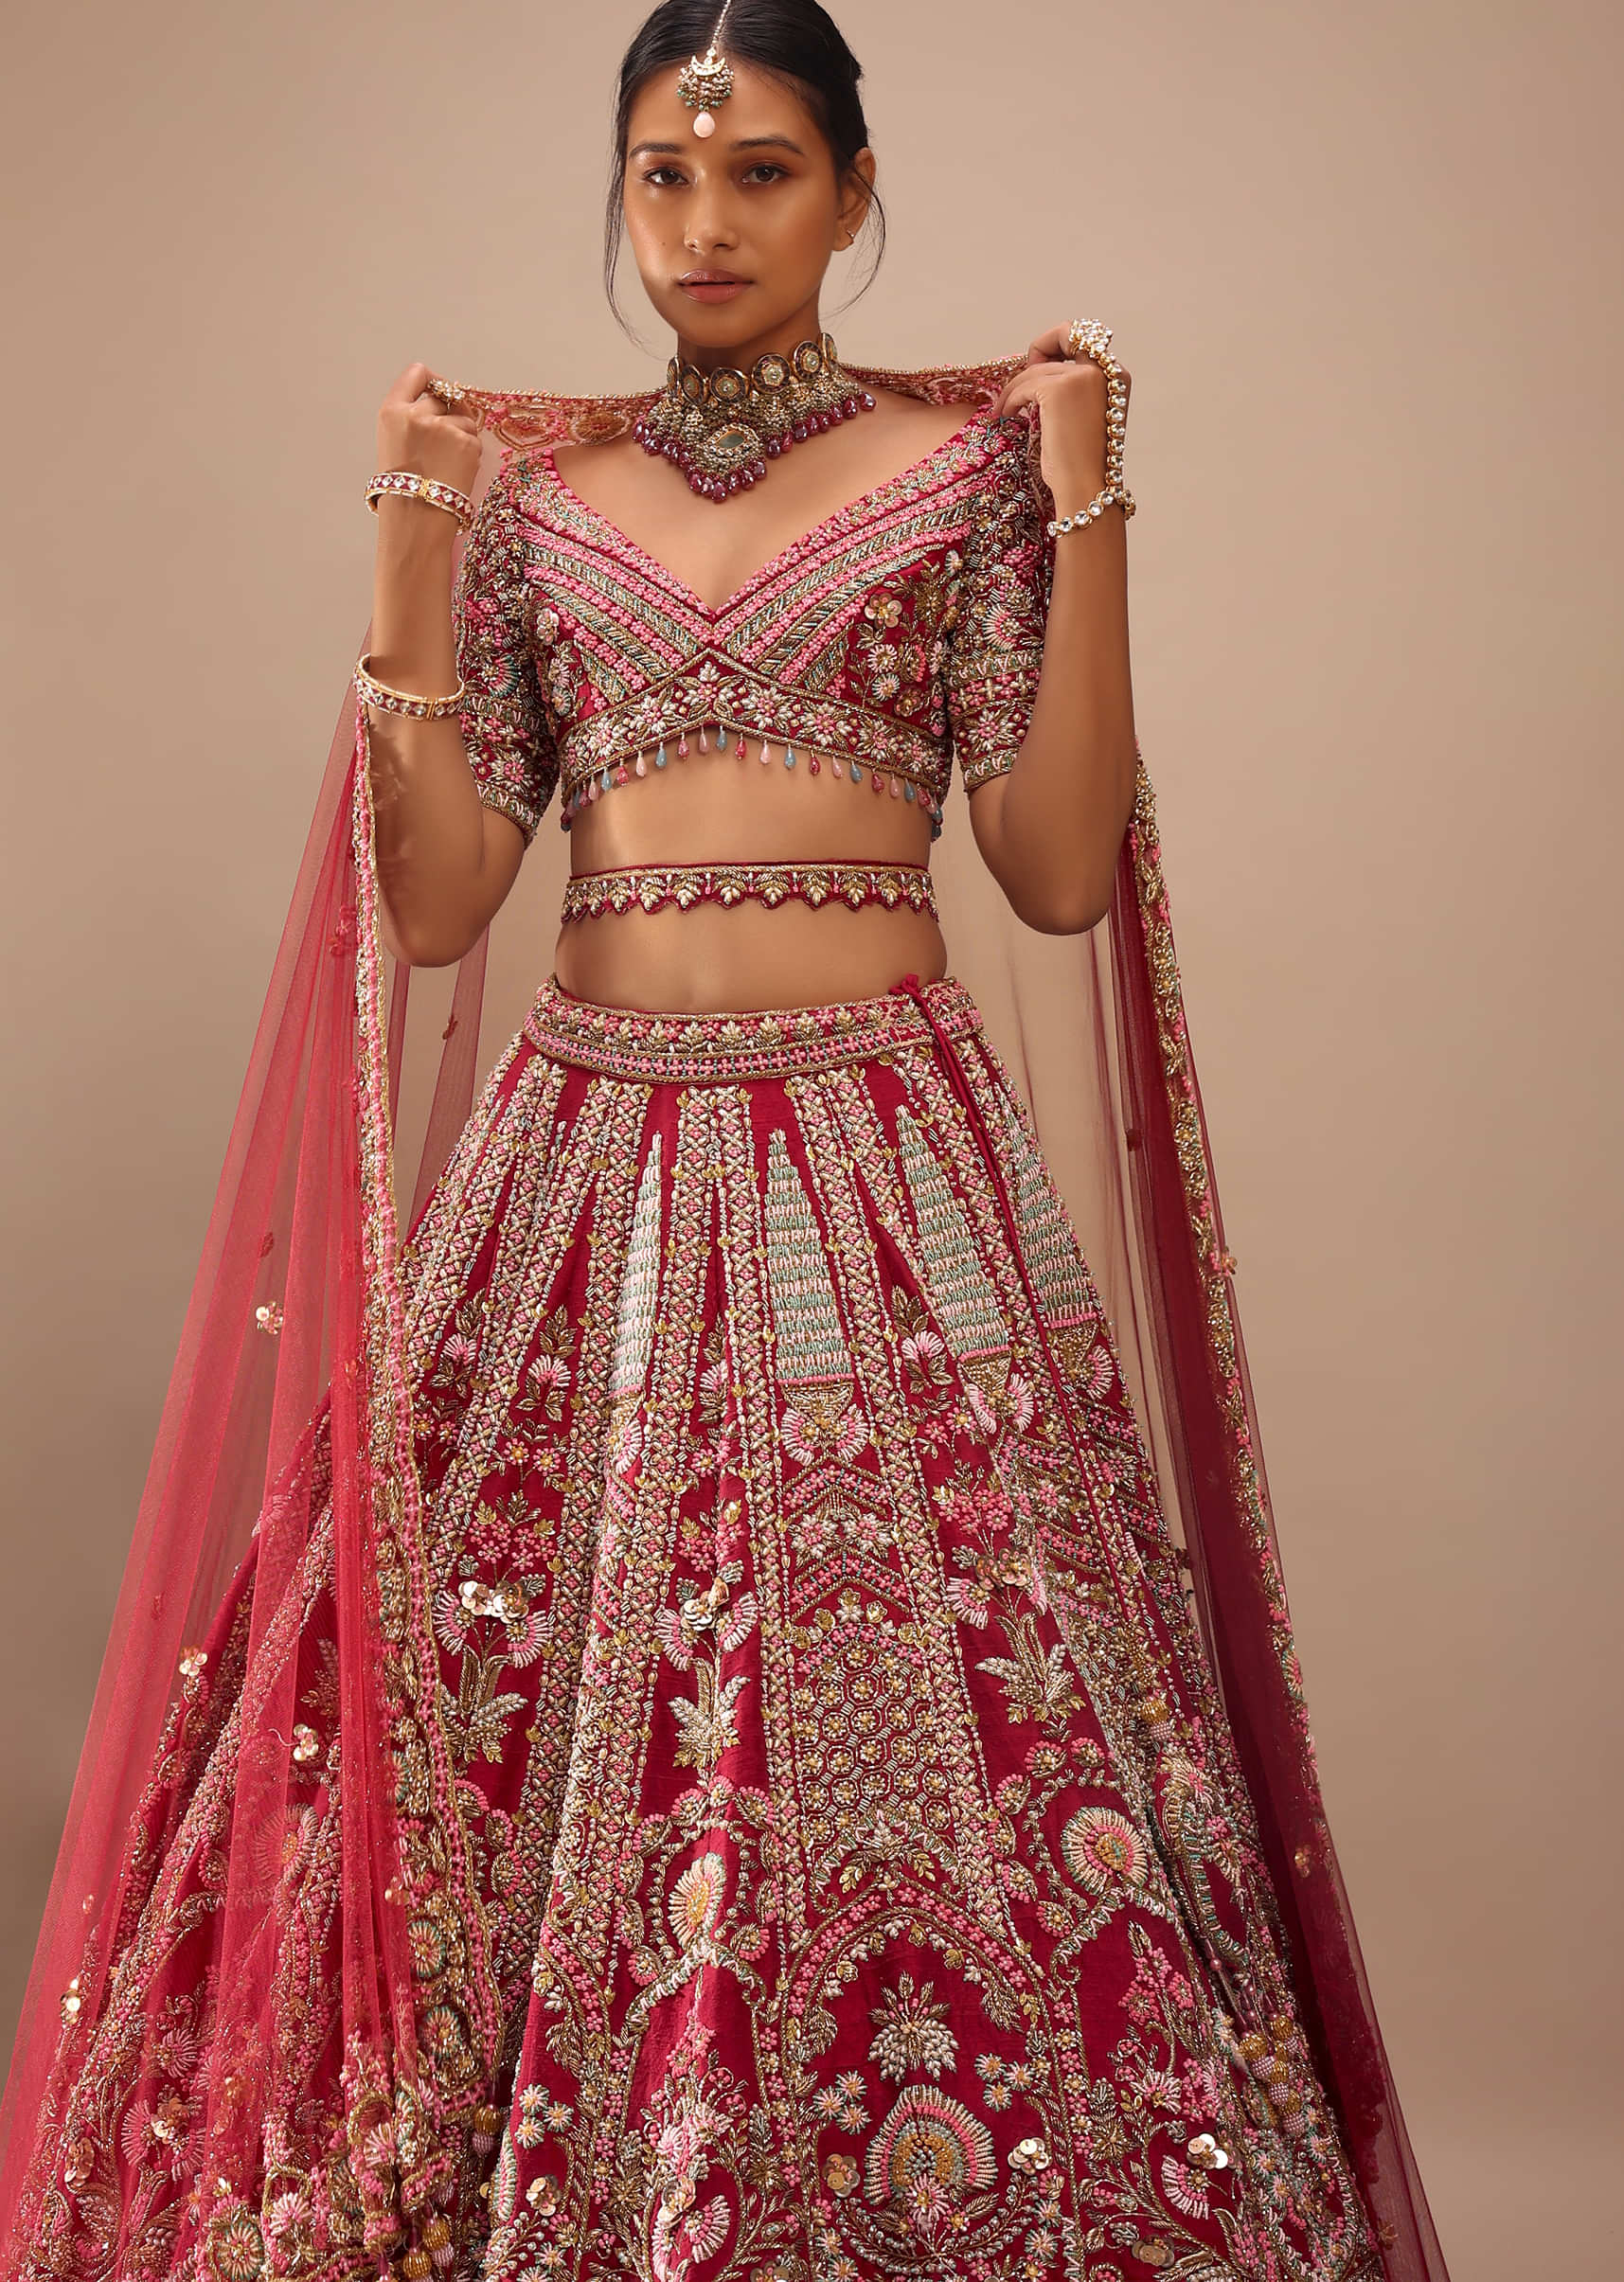 Red Raw Silk Lehenga Choli With Hand Embroidered Multicolored Heritage Kalis And Embossed Floral Motifs